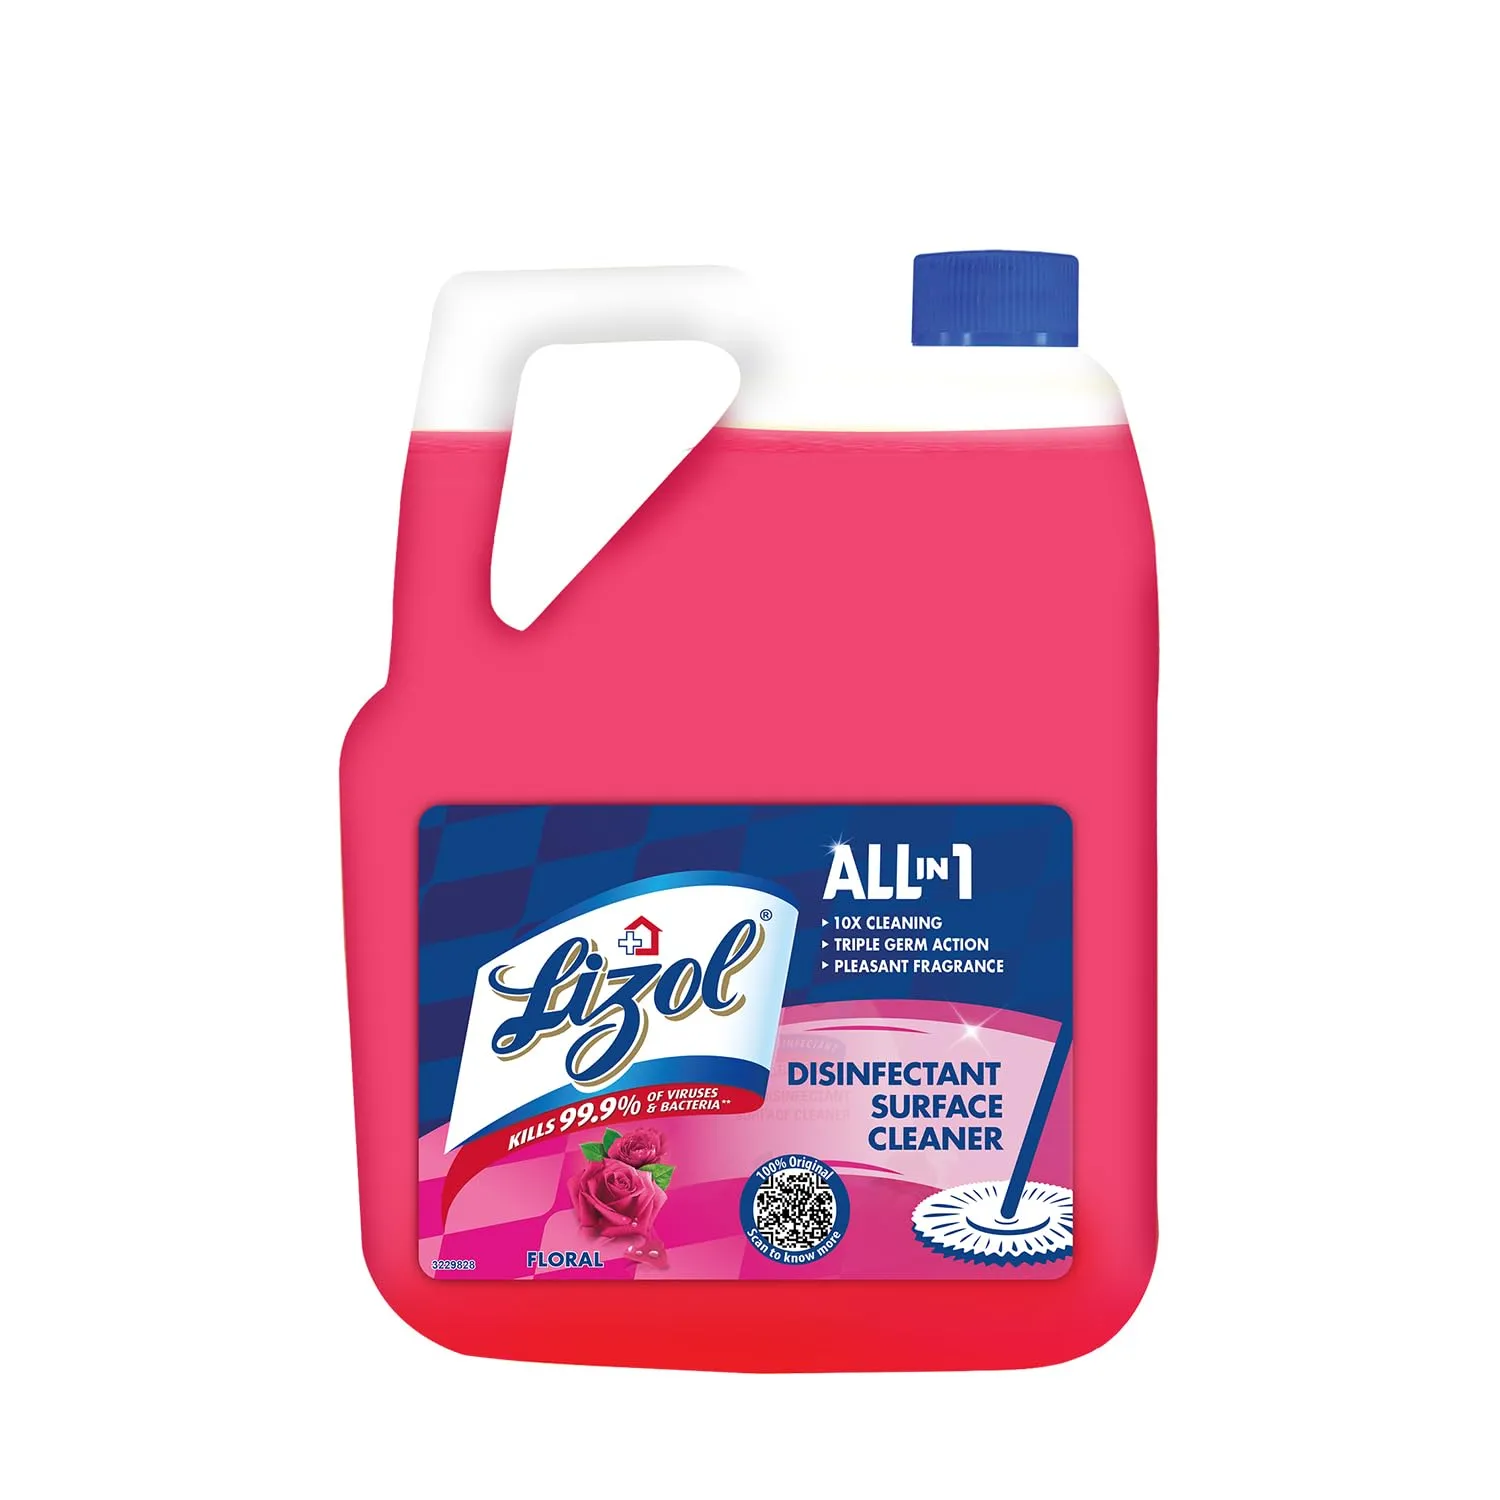 Lizol 5 Litre Disinfectant Surface and Floor Cleaner Liquid, Suitable for All Floor Mops, Kills 99.99% Germs